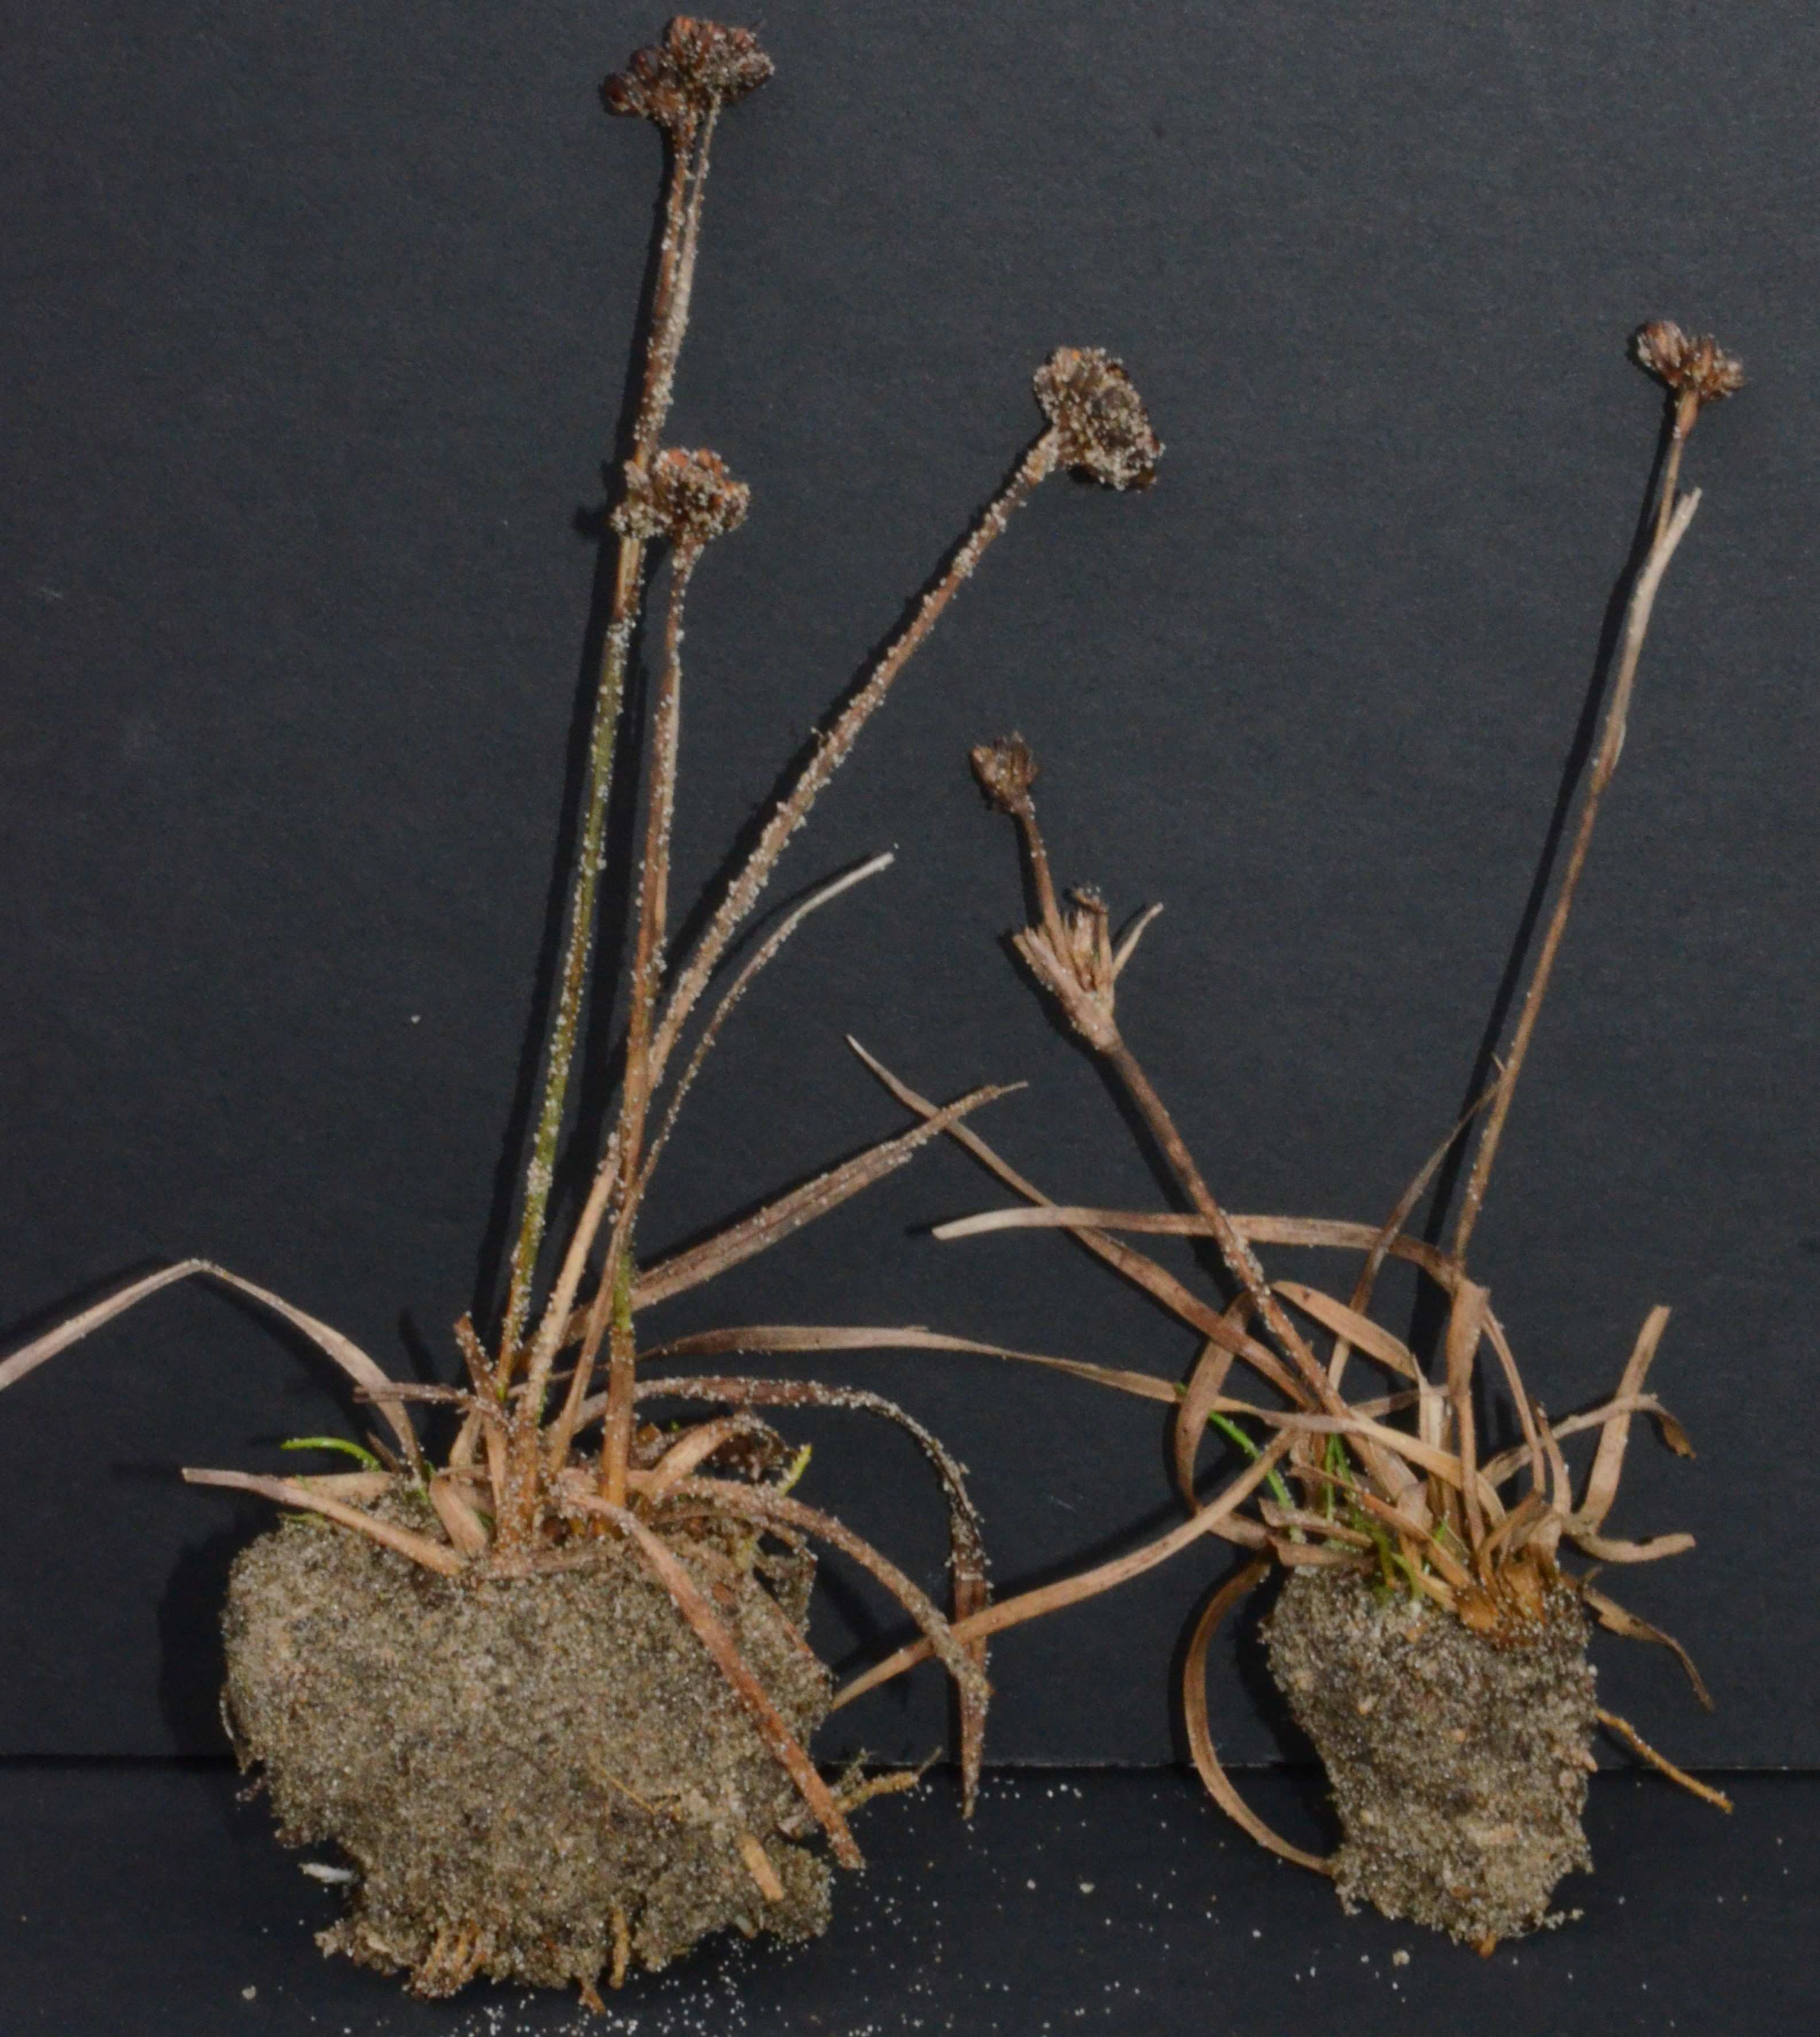 Juncus falcatus ssp. sitchensis division with shoot, rhizome, and roots present. Note native sandy soil may be obscuring the rhizome. 